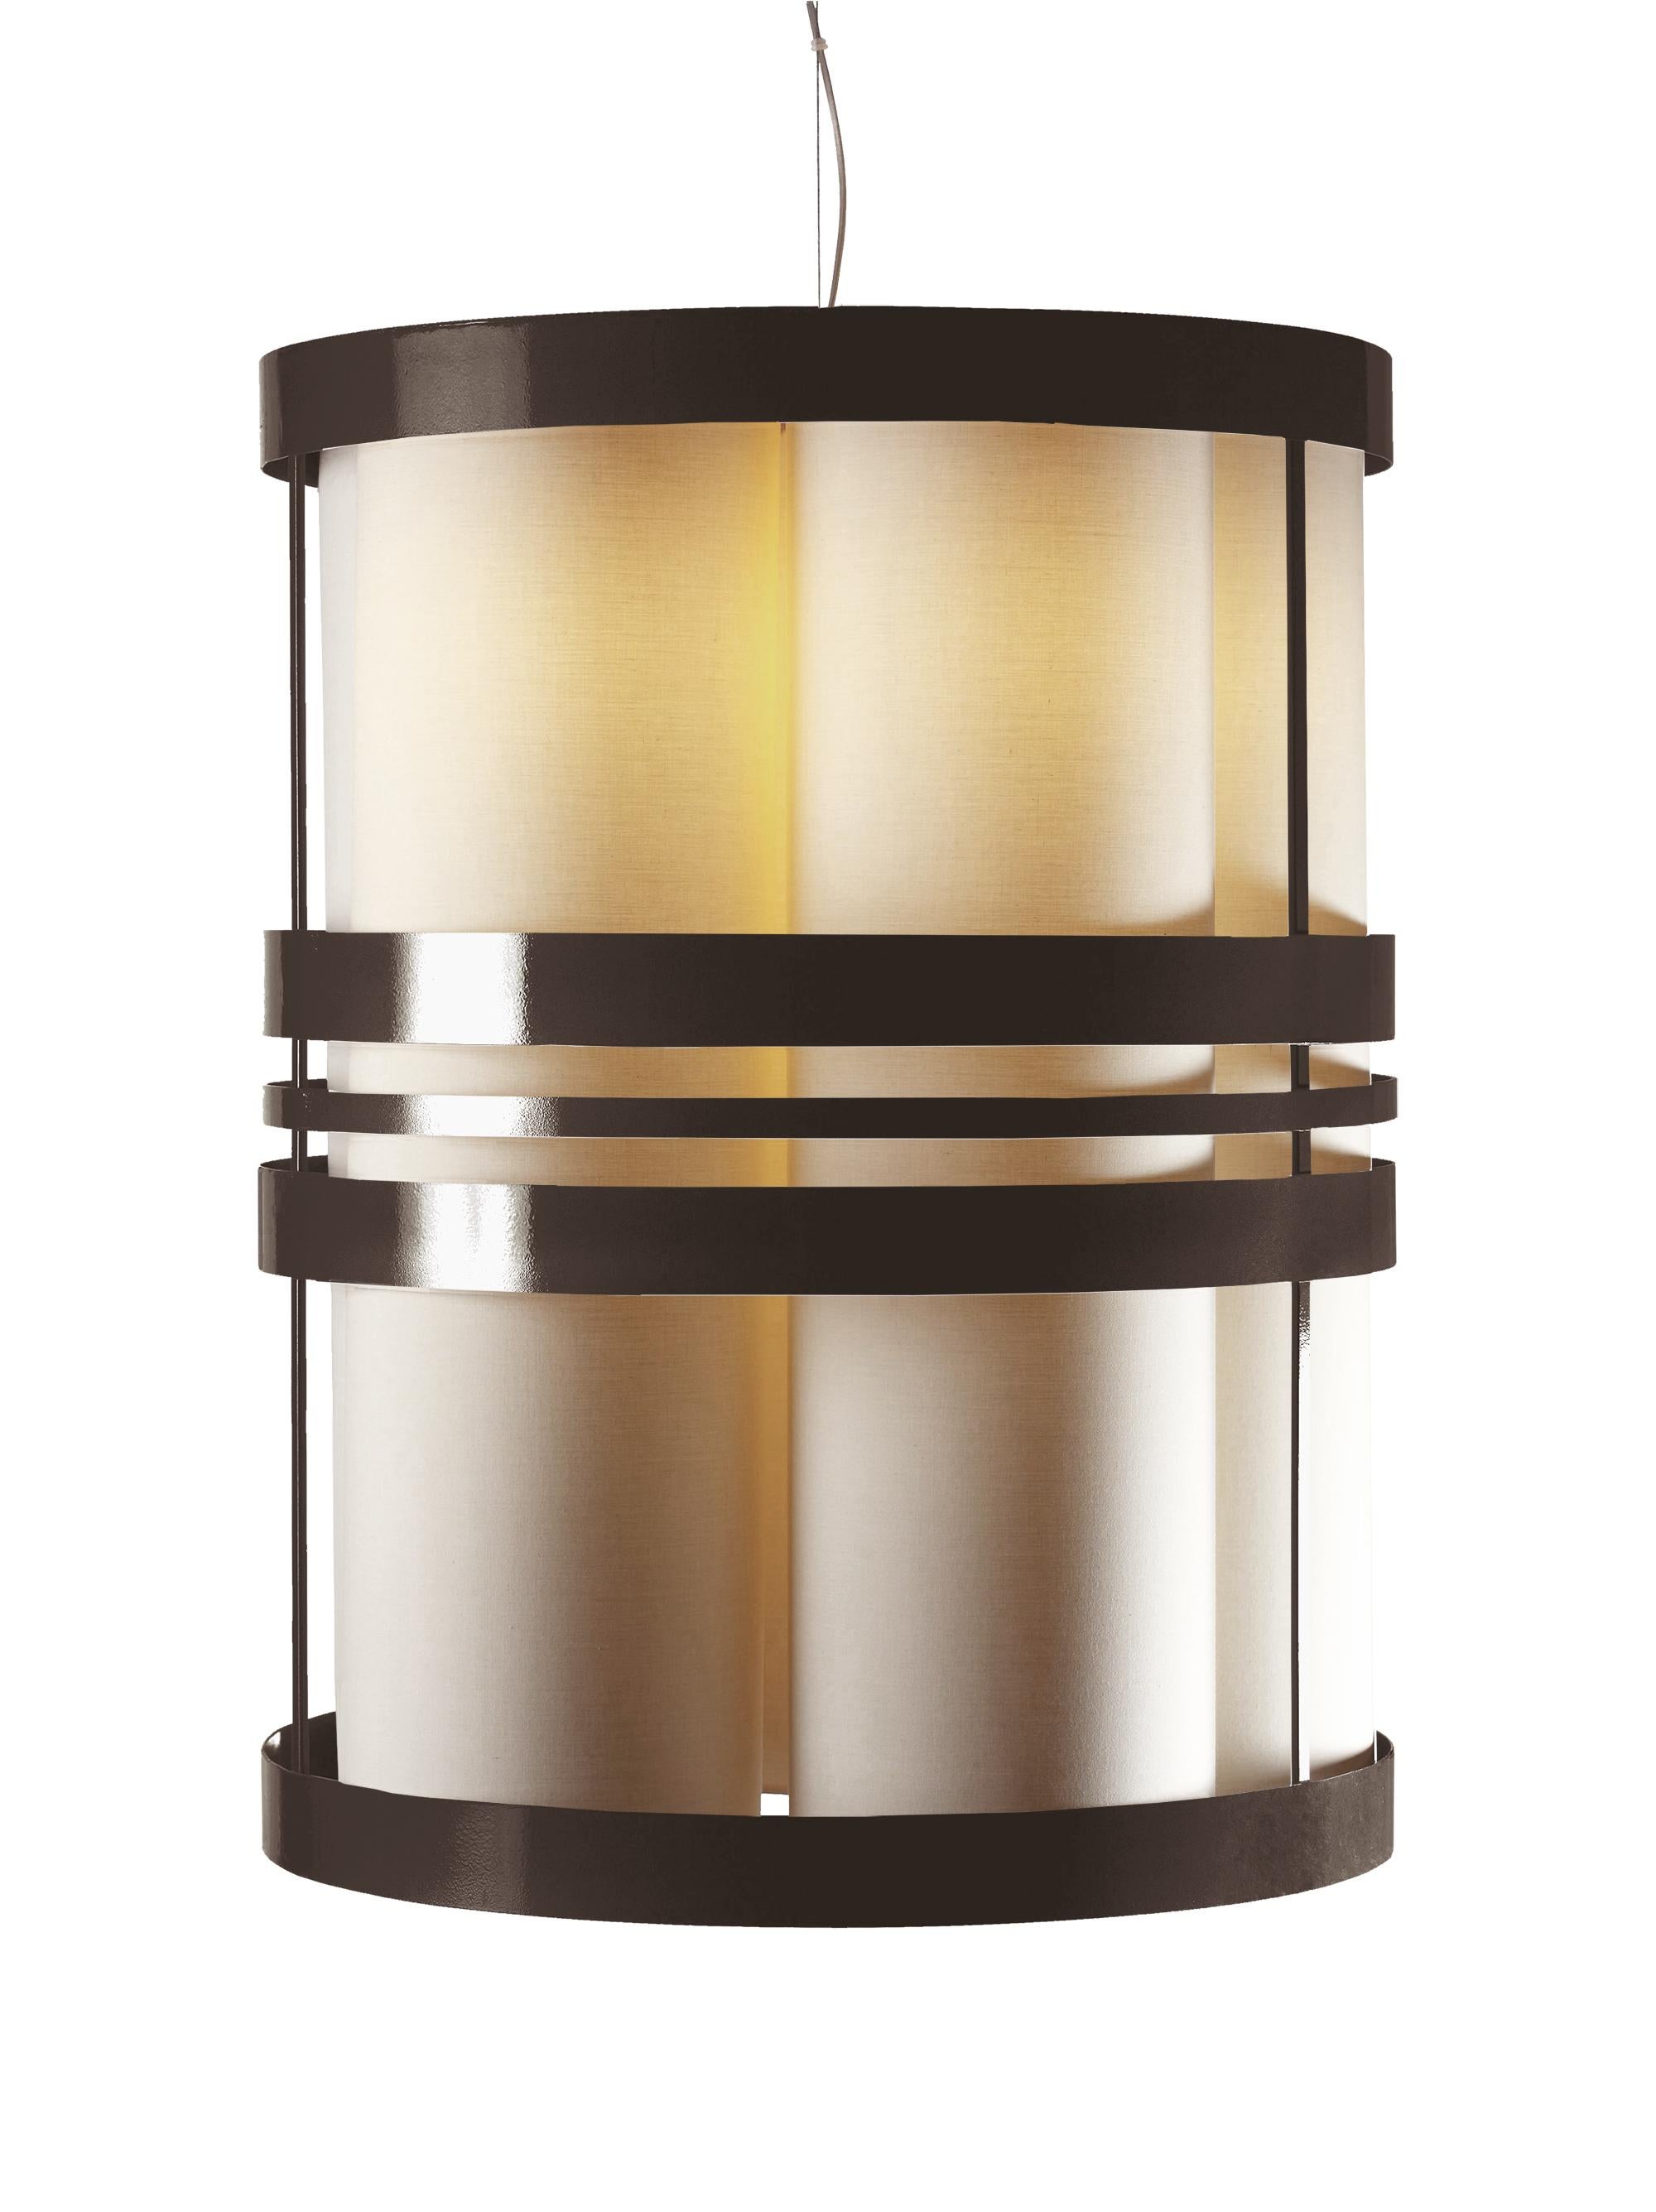 Round perfection inspired by Art Deco's shapes, circus lamp will be a wonderful addition to any space. In several lacquered metal colors and 100% cotton lampshade. Made to Order. 

Utu Lamps is part of the Mambo Unlimited Ideas design group from